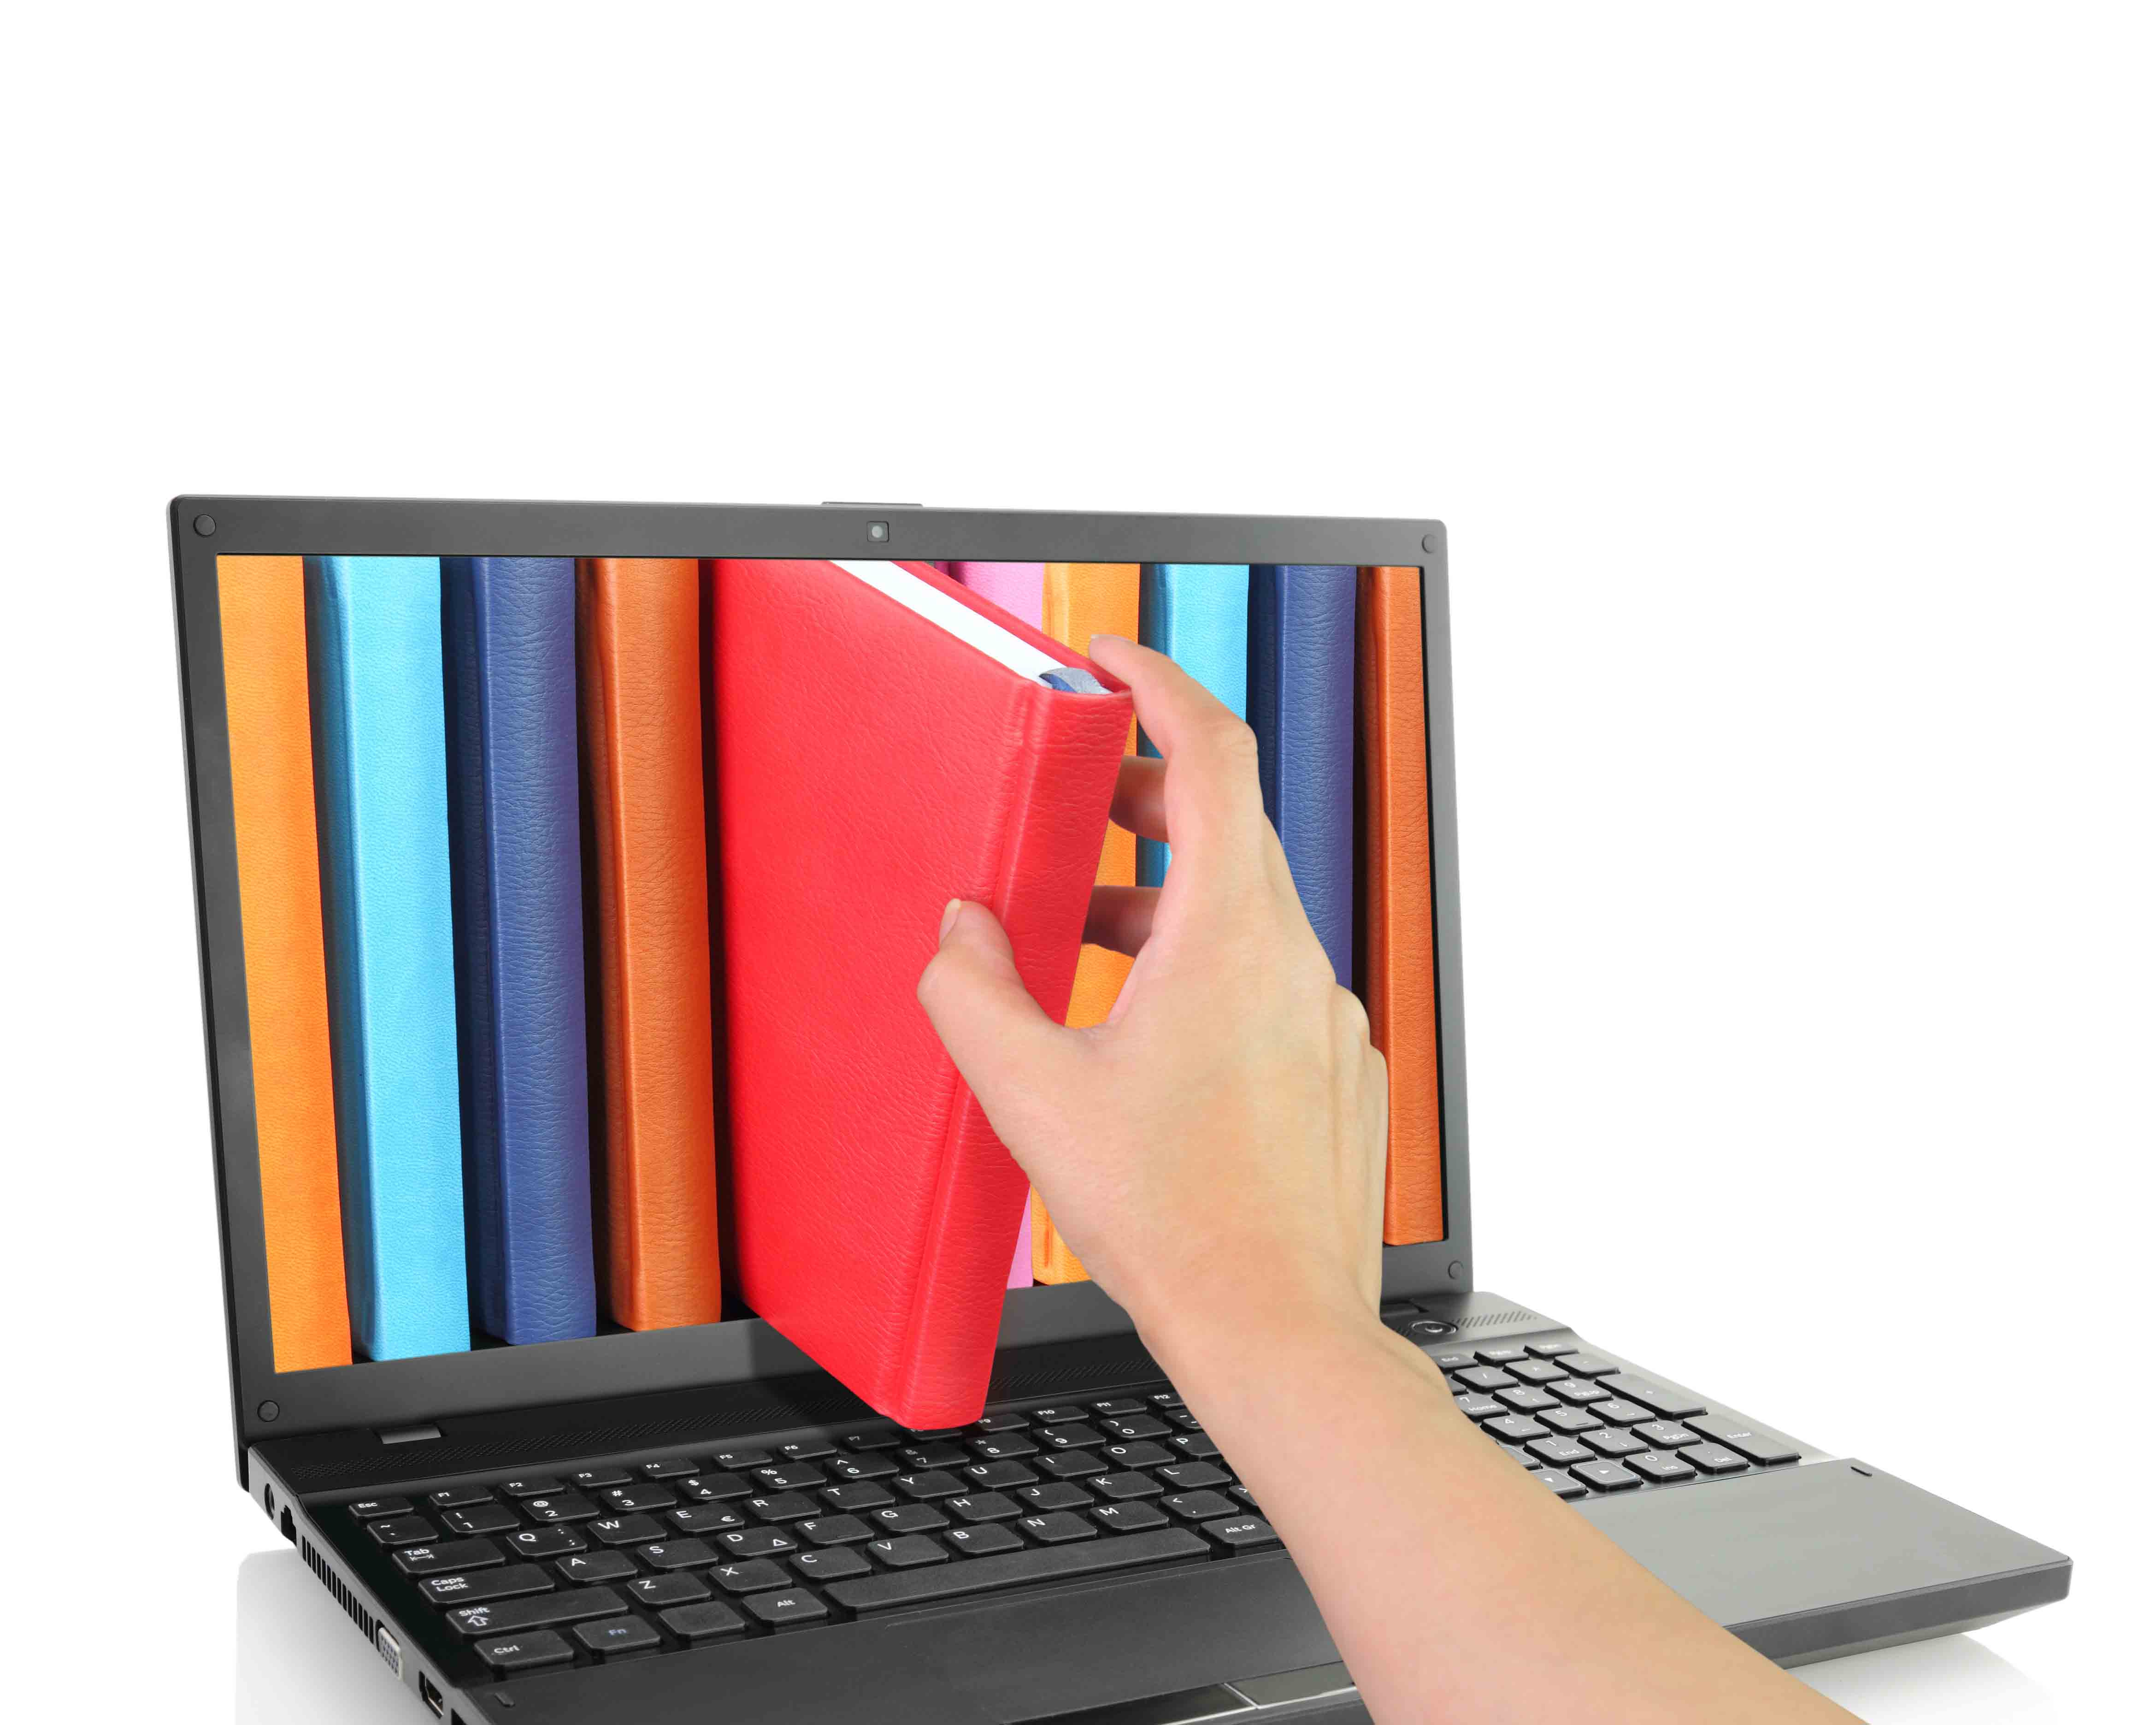 Hand pulling book out of computer